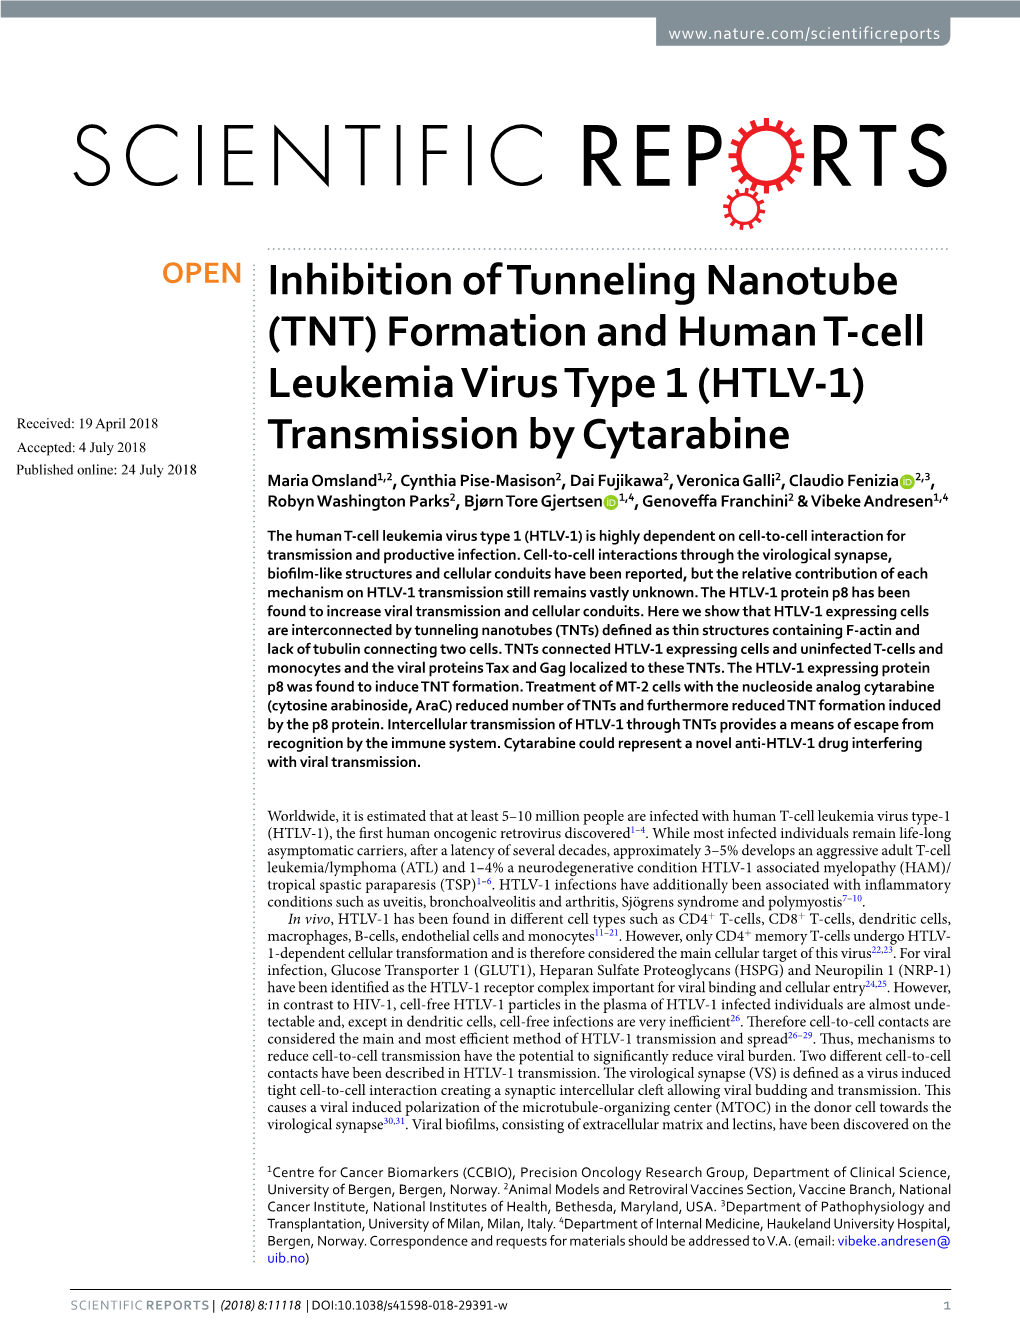 Inhibition of Tunneling Nanotube (TNT) Formation And